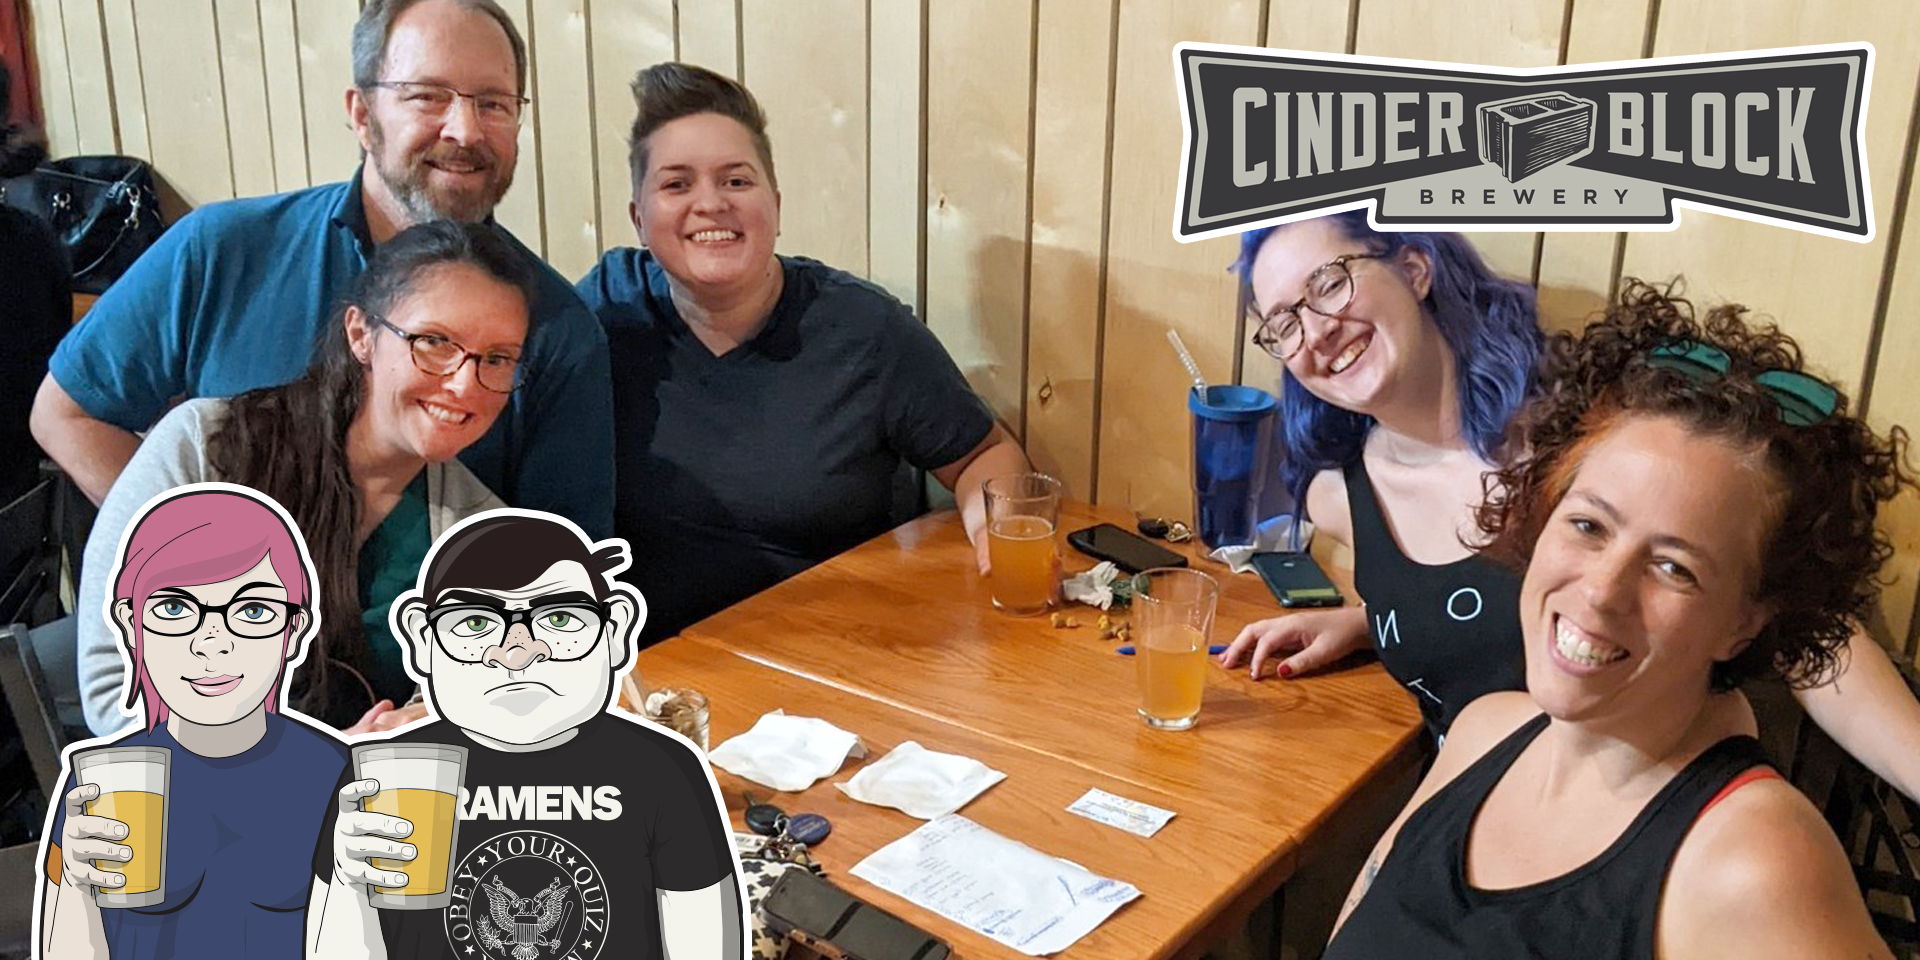 Geeks Who Drink Trivia Night at Cinder Block Brewery promotional image